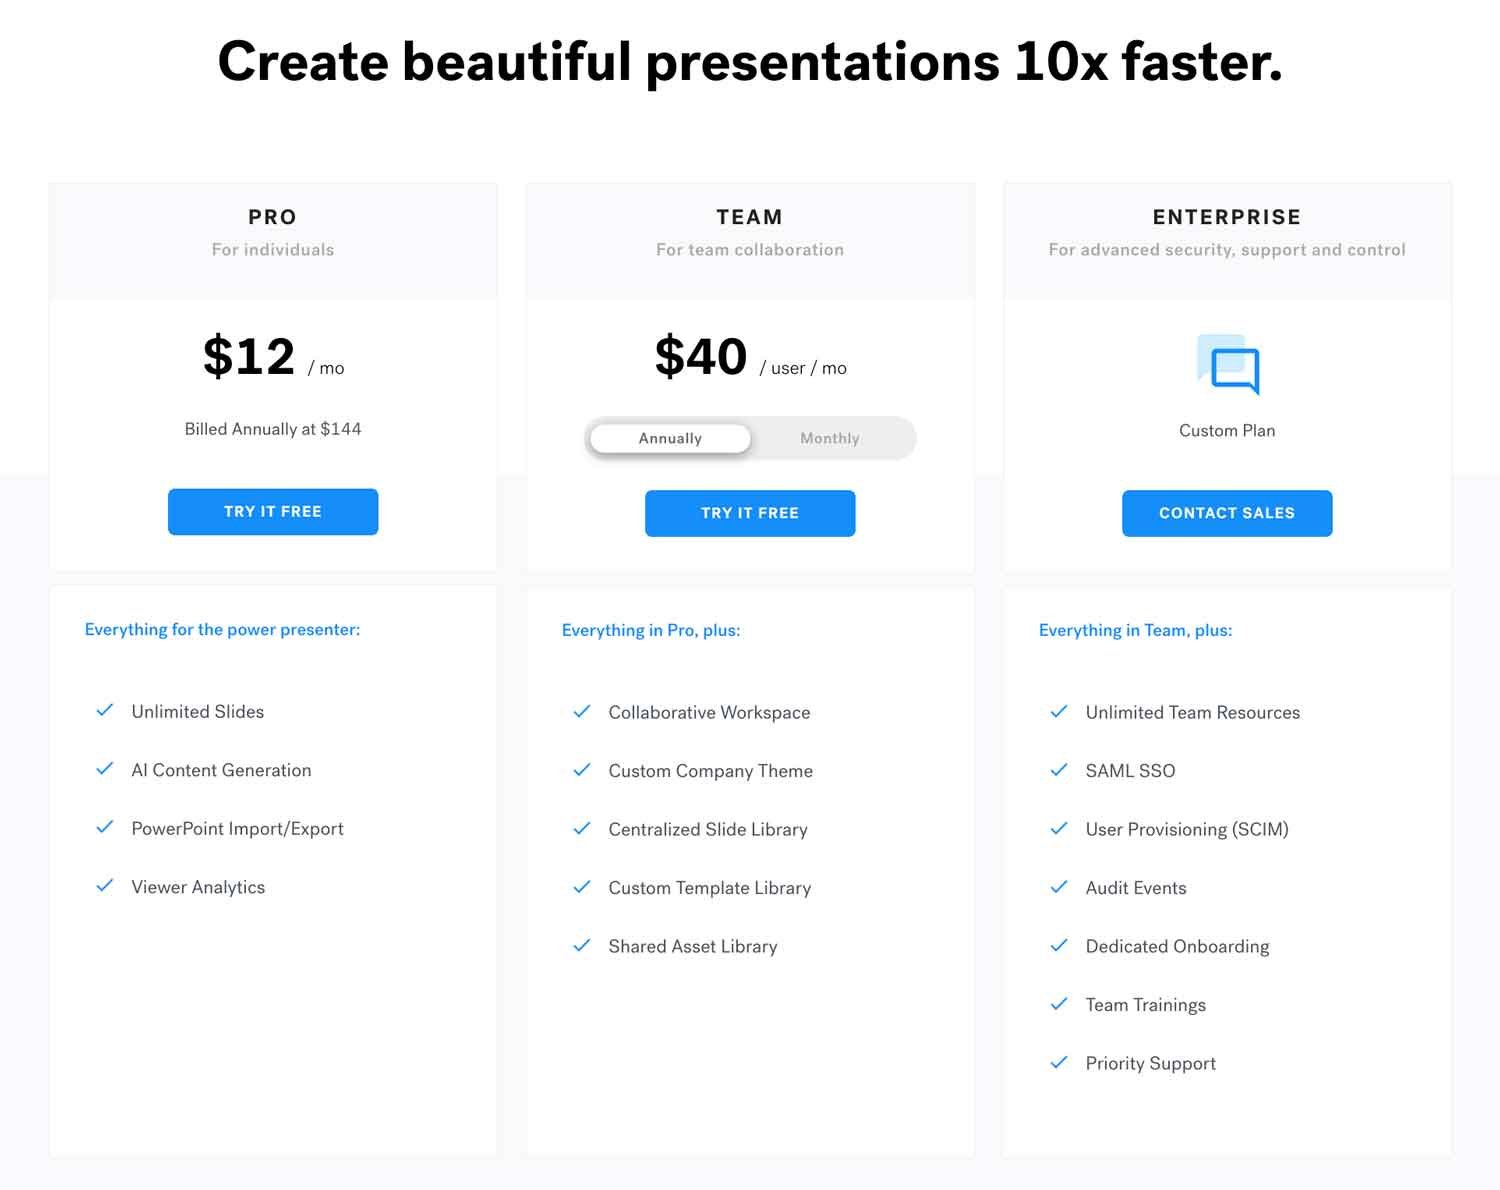 How to Use AI for Better Presentations